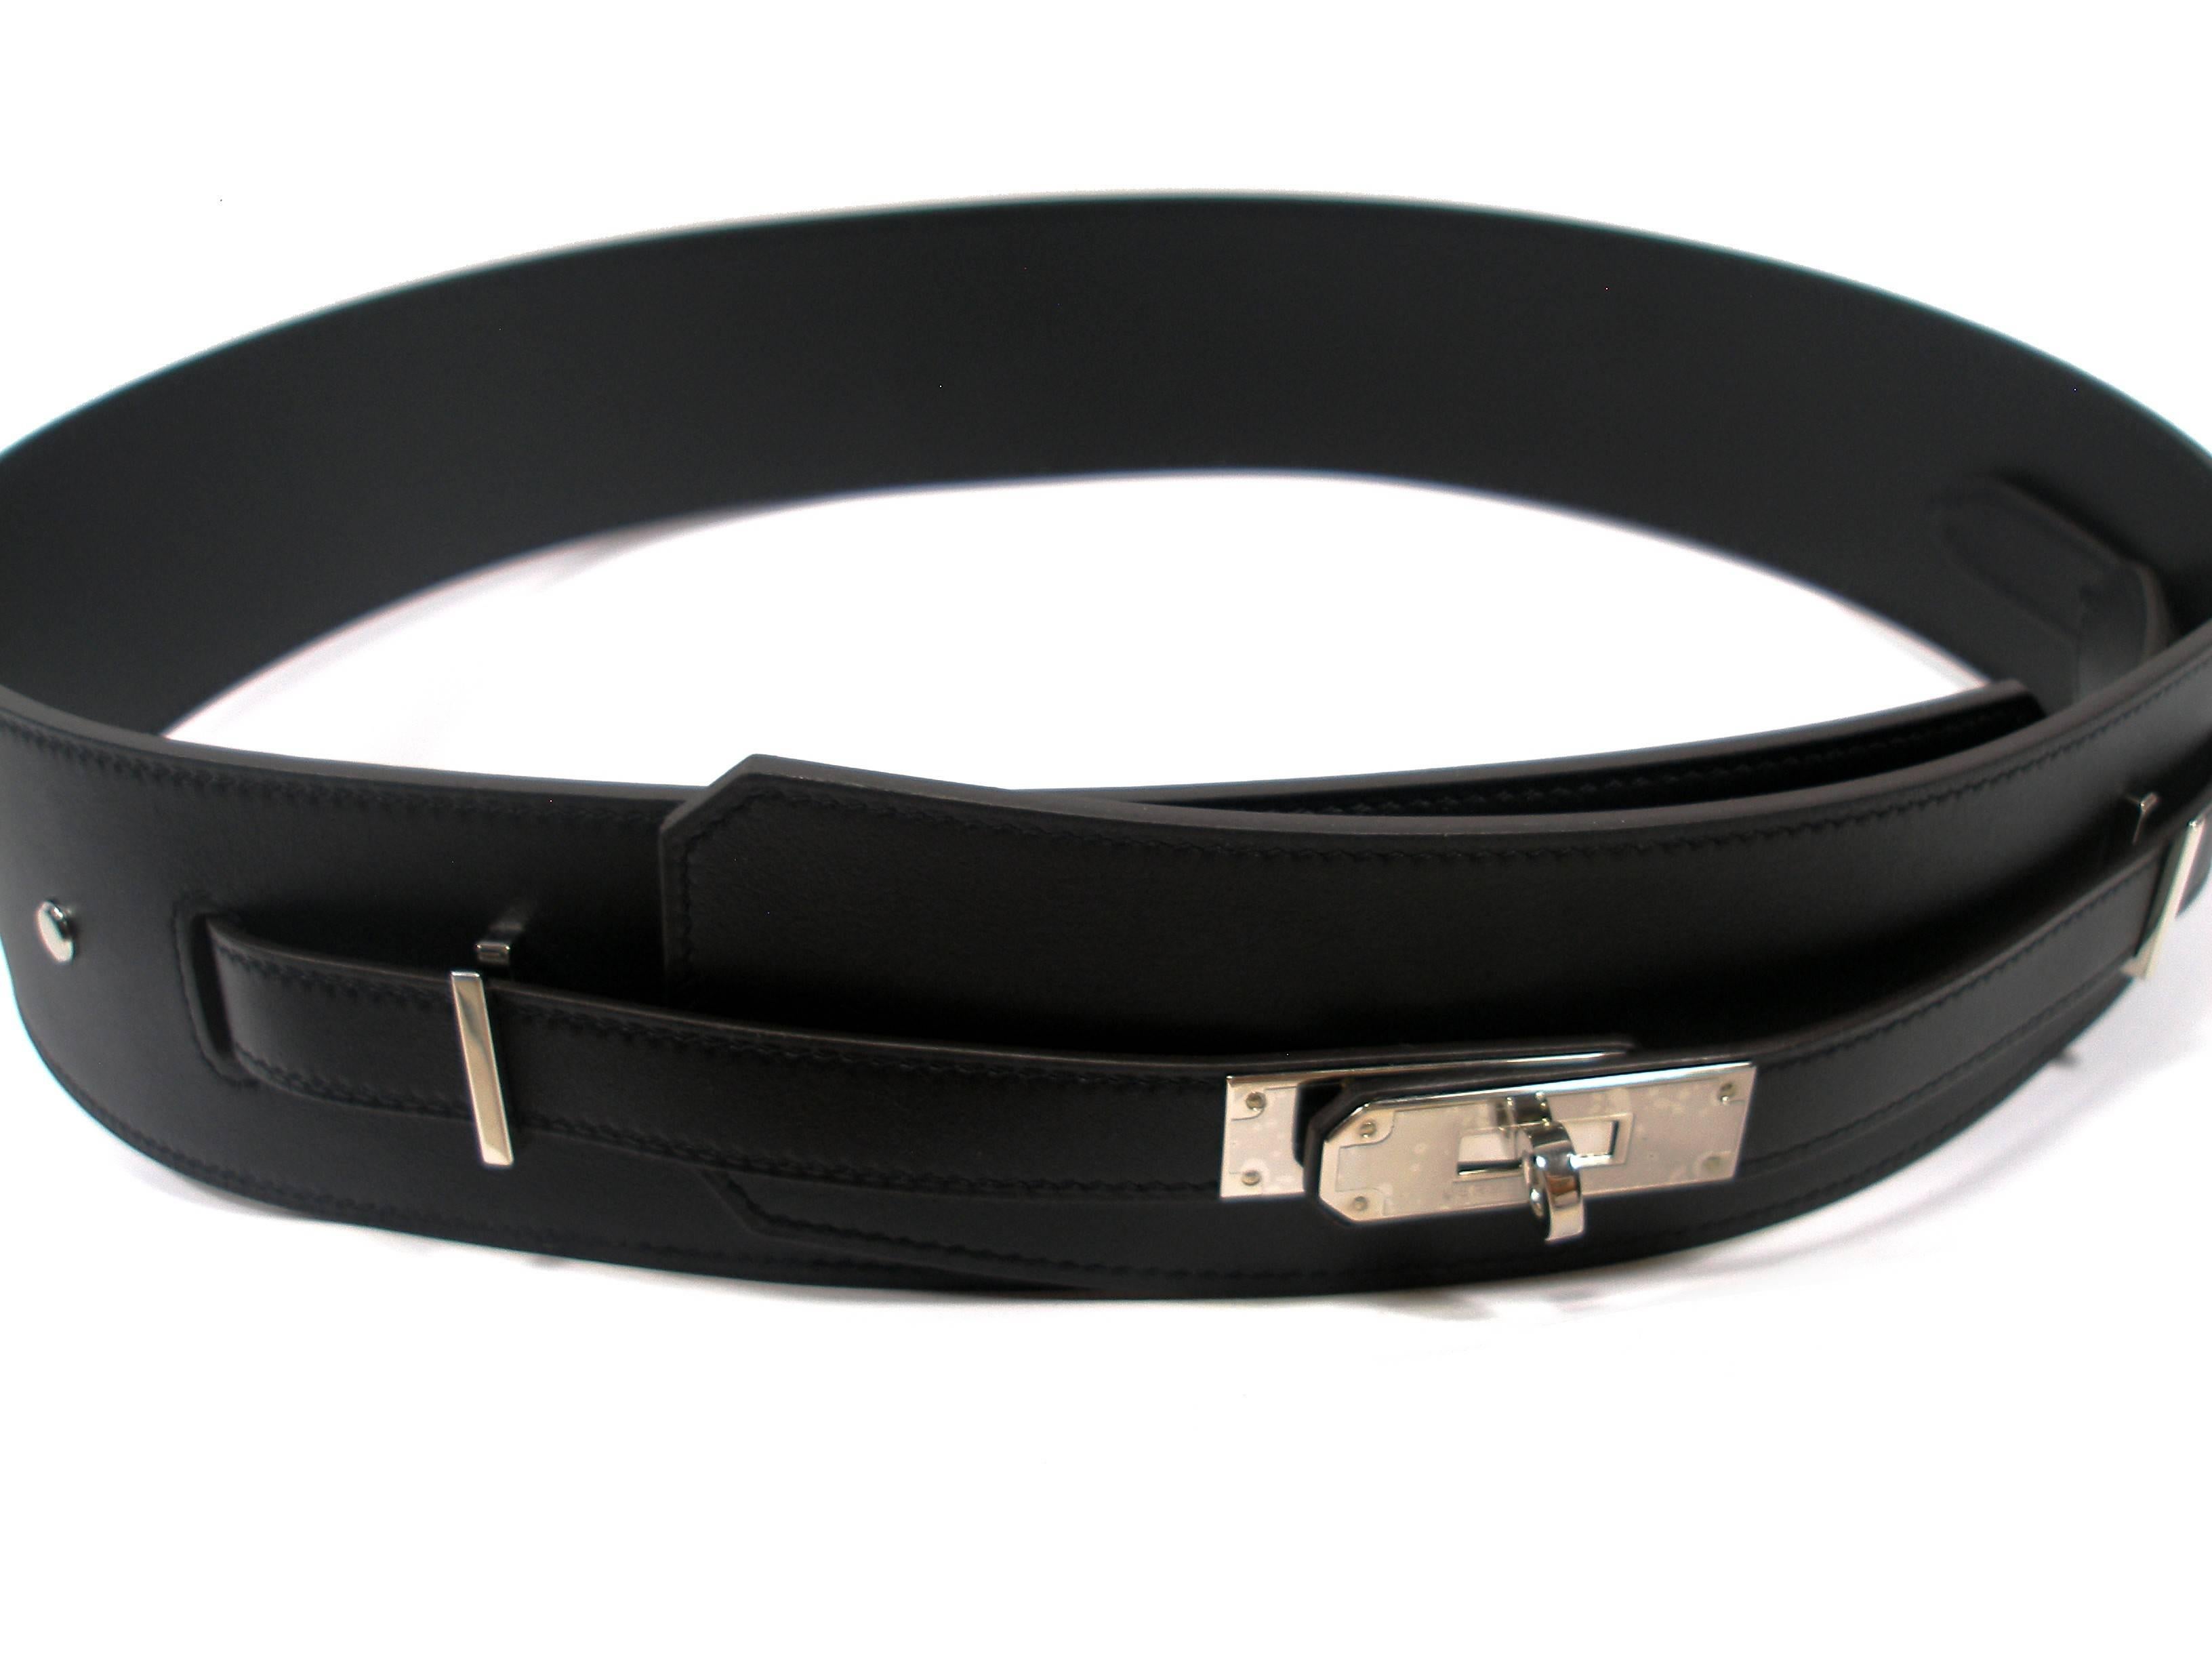 RARE Hermès Piano Belt 
Black color
Size : 95 cm 
Ajustable
Plastic is still on hardware 
Palladium hardware 
Stamp : P
Retail price 1700 € 
Sorry no box , its comes with Hermès shopping bag and ribbon
Please considere for this purchase :  It comes